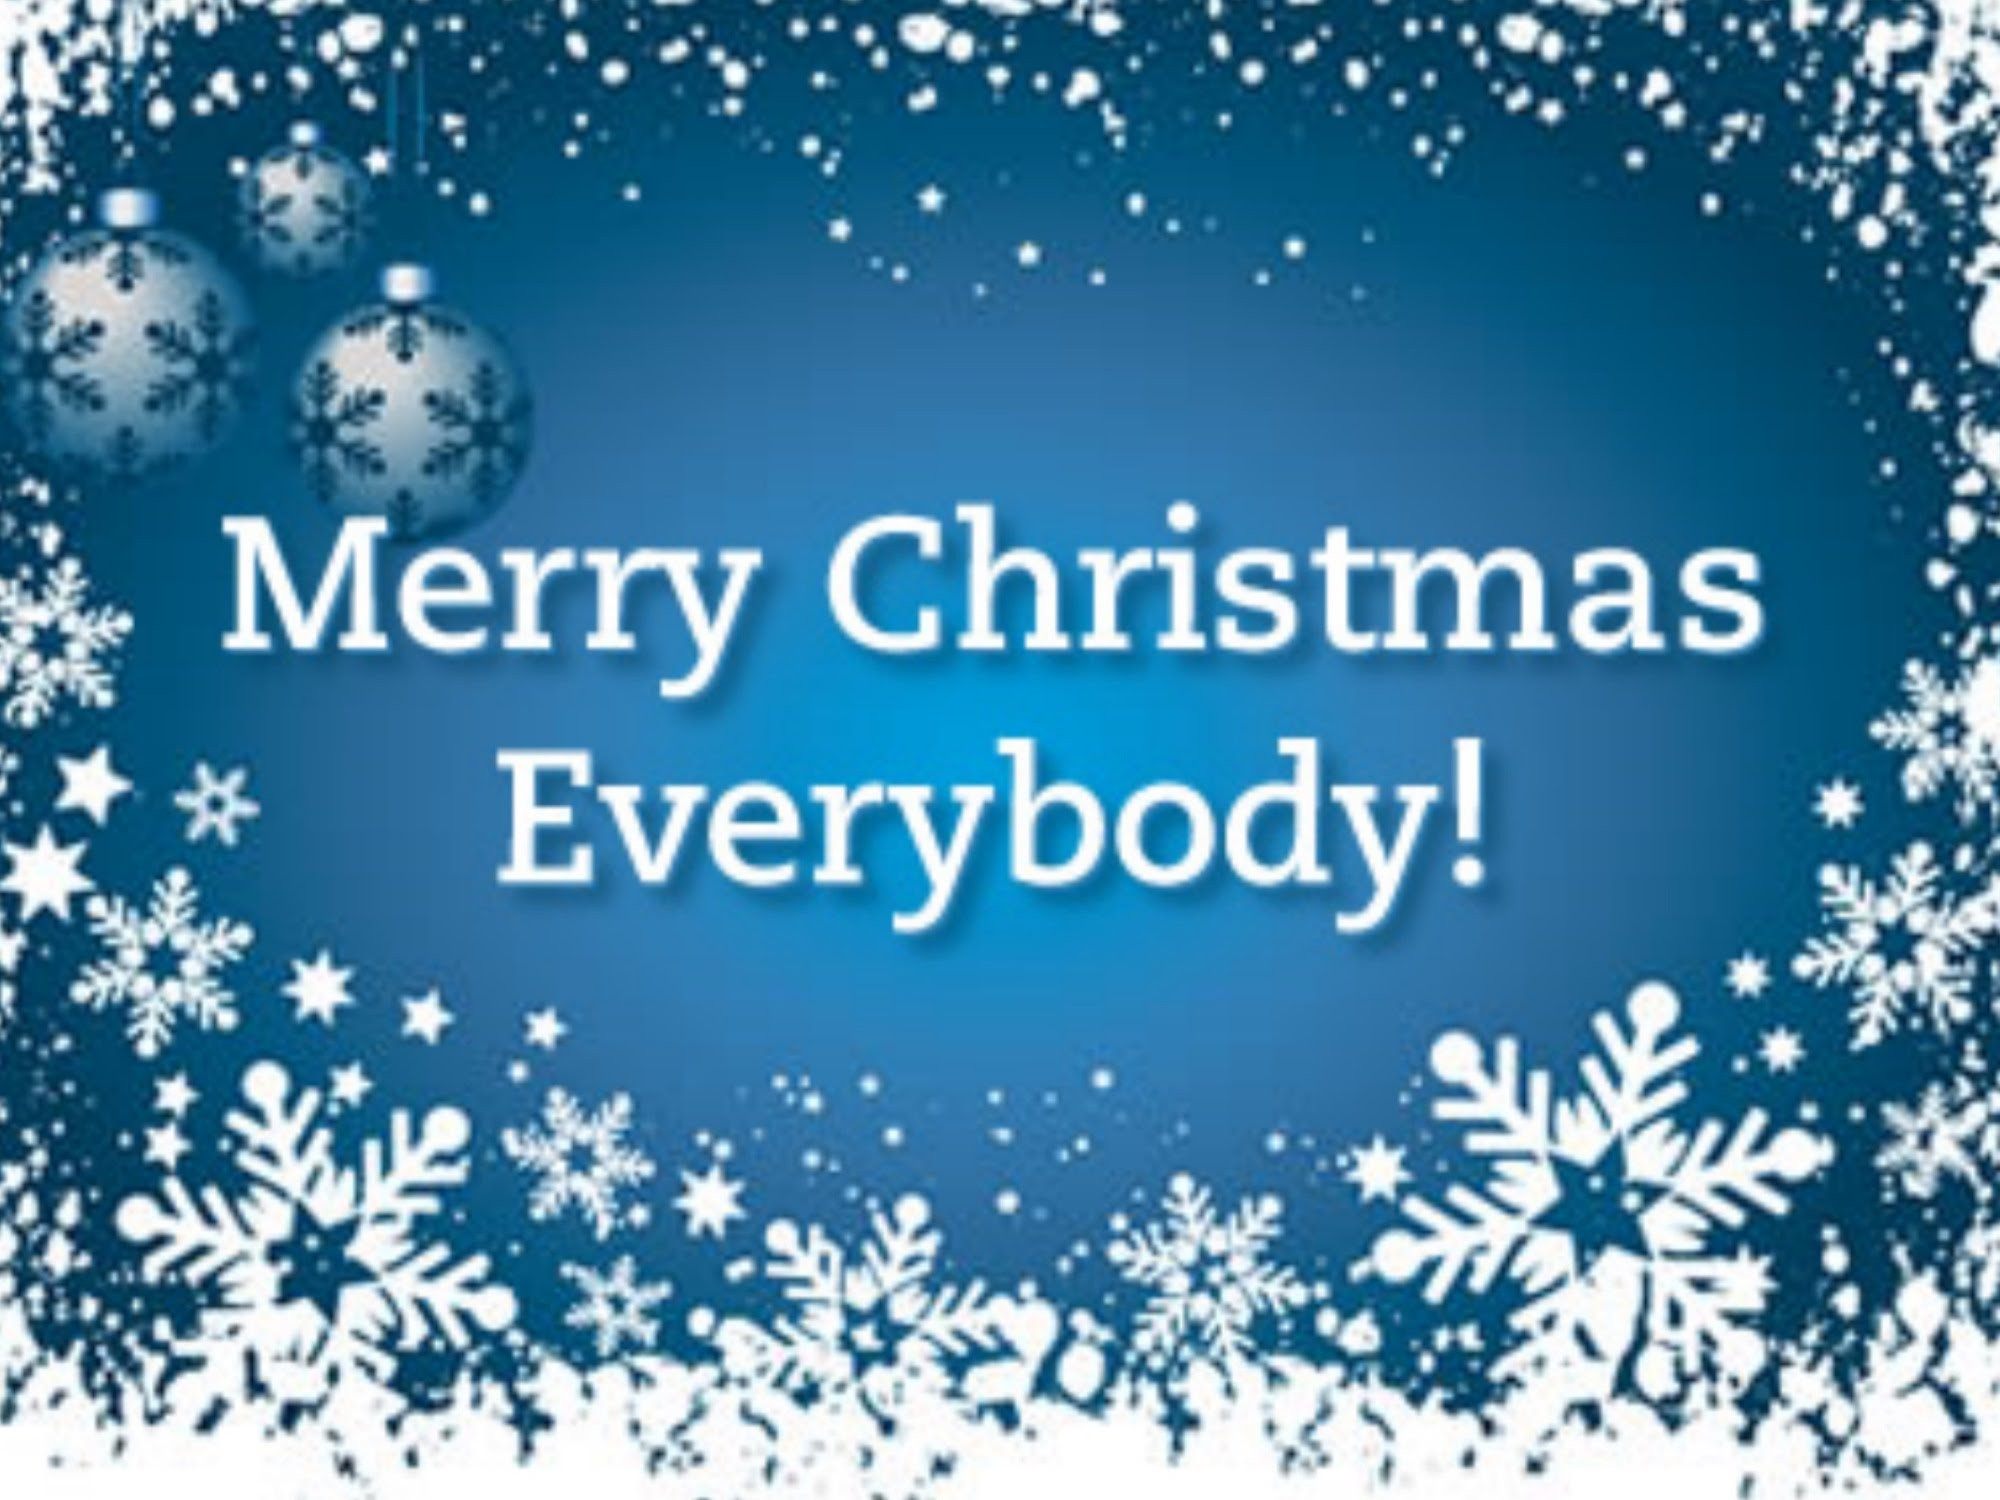 Merry Christmas Everyone Quotes
 Download Free Printable Graphics Wallpaper Posters